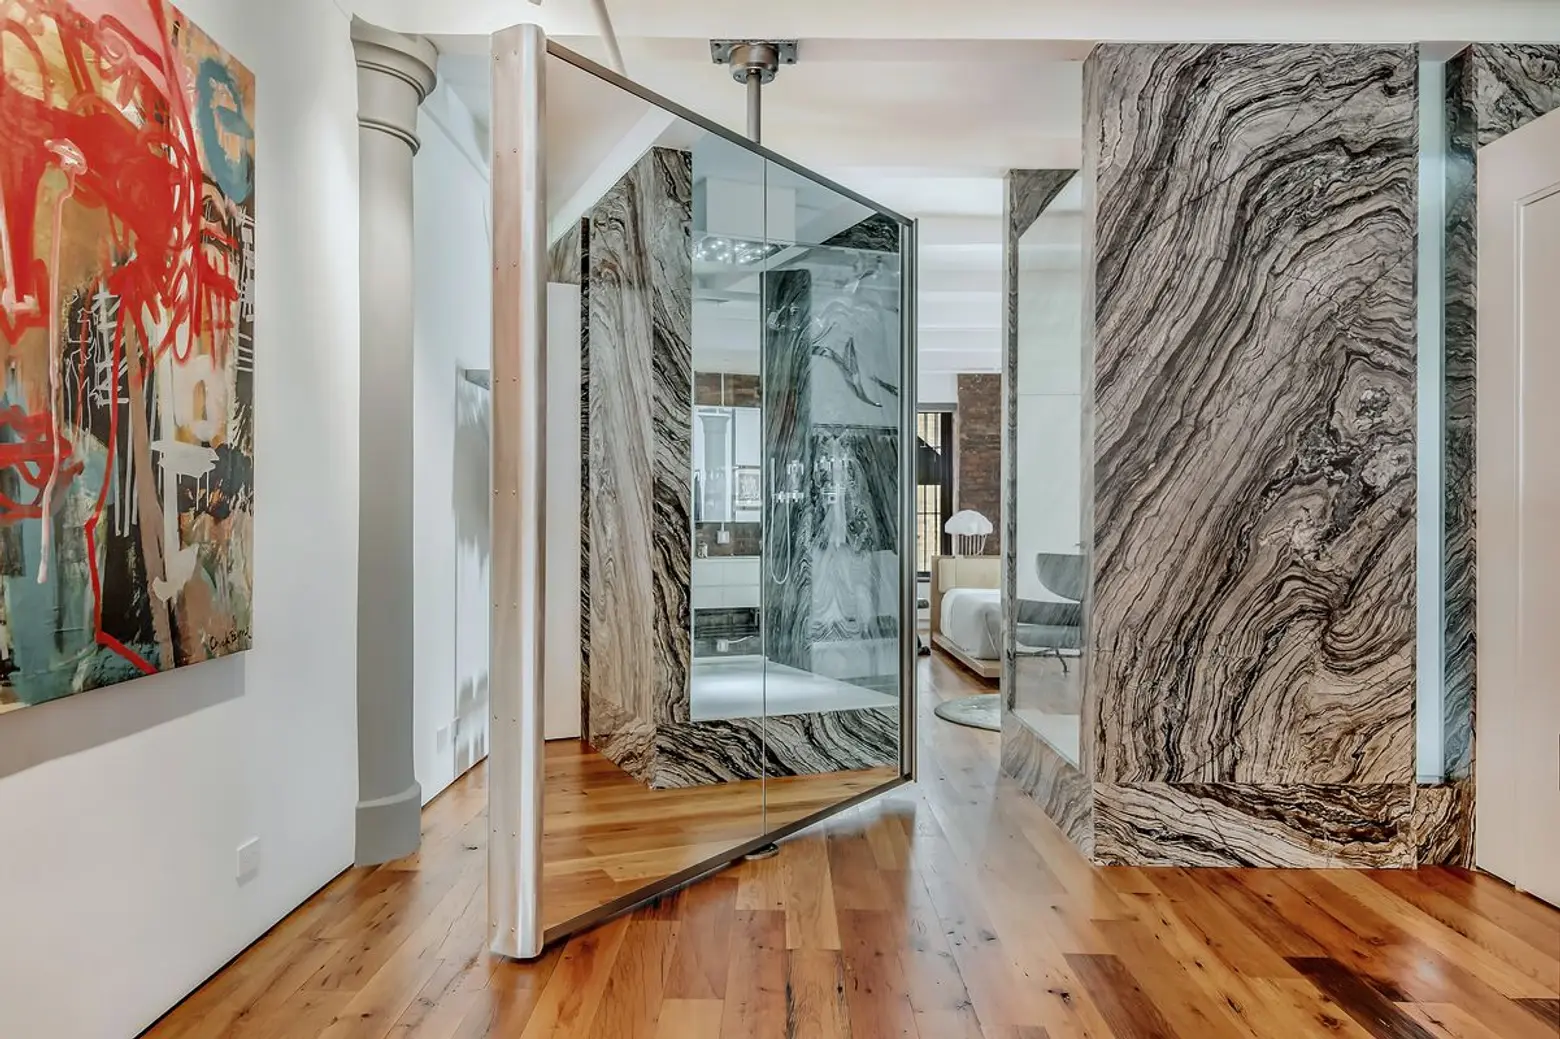 Extroverts, voyeurs and people with nothing to hide will love this $5M Chelsea loft